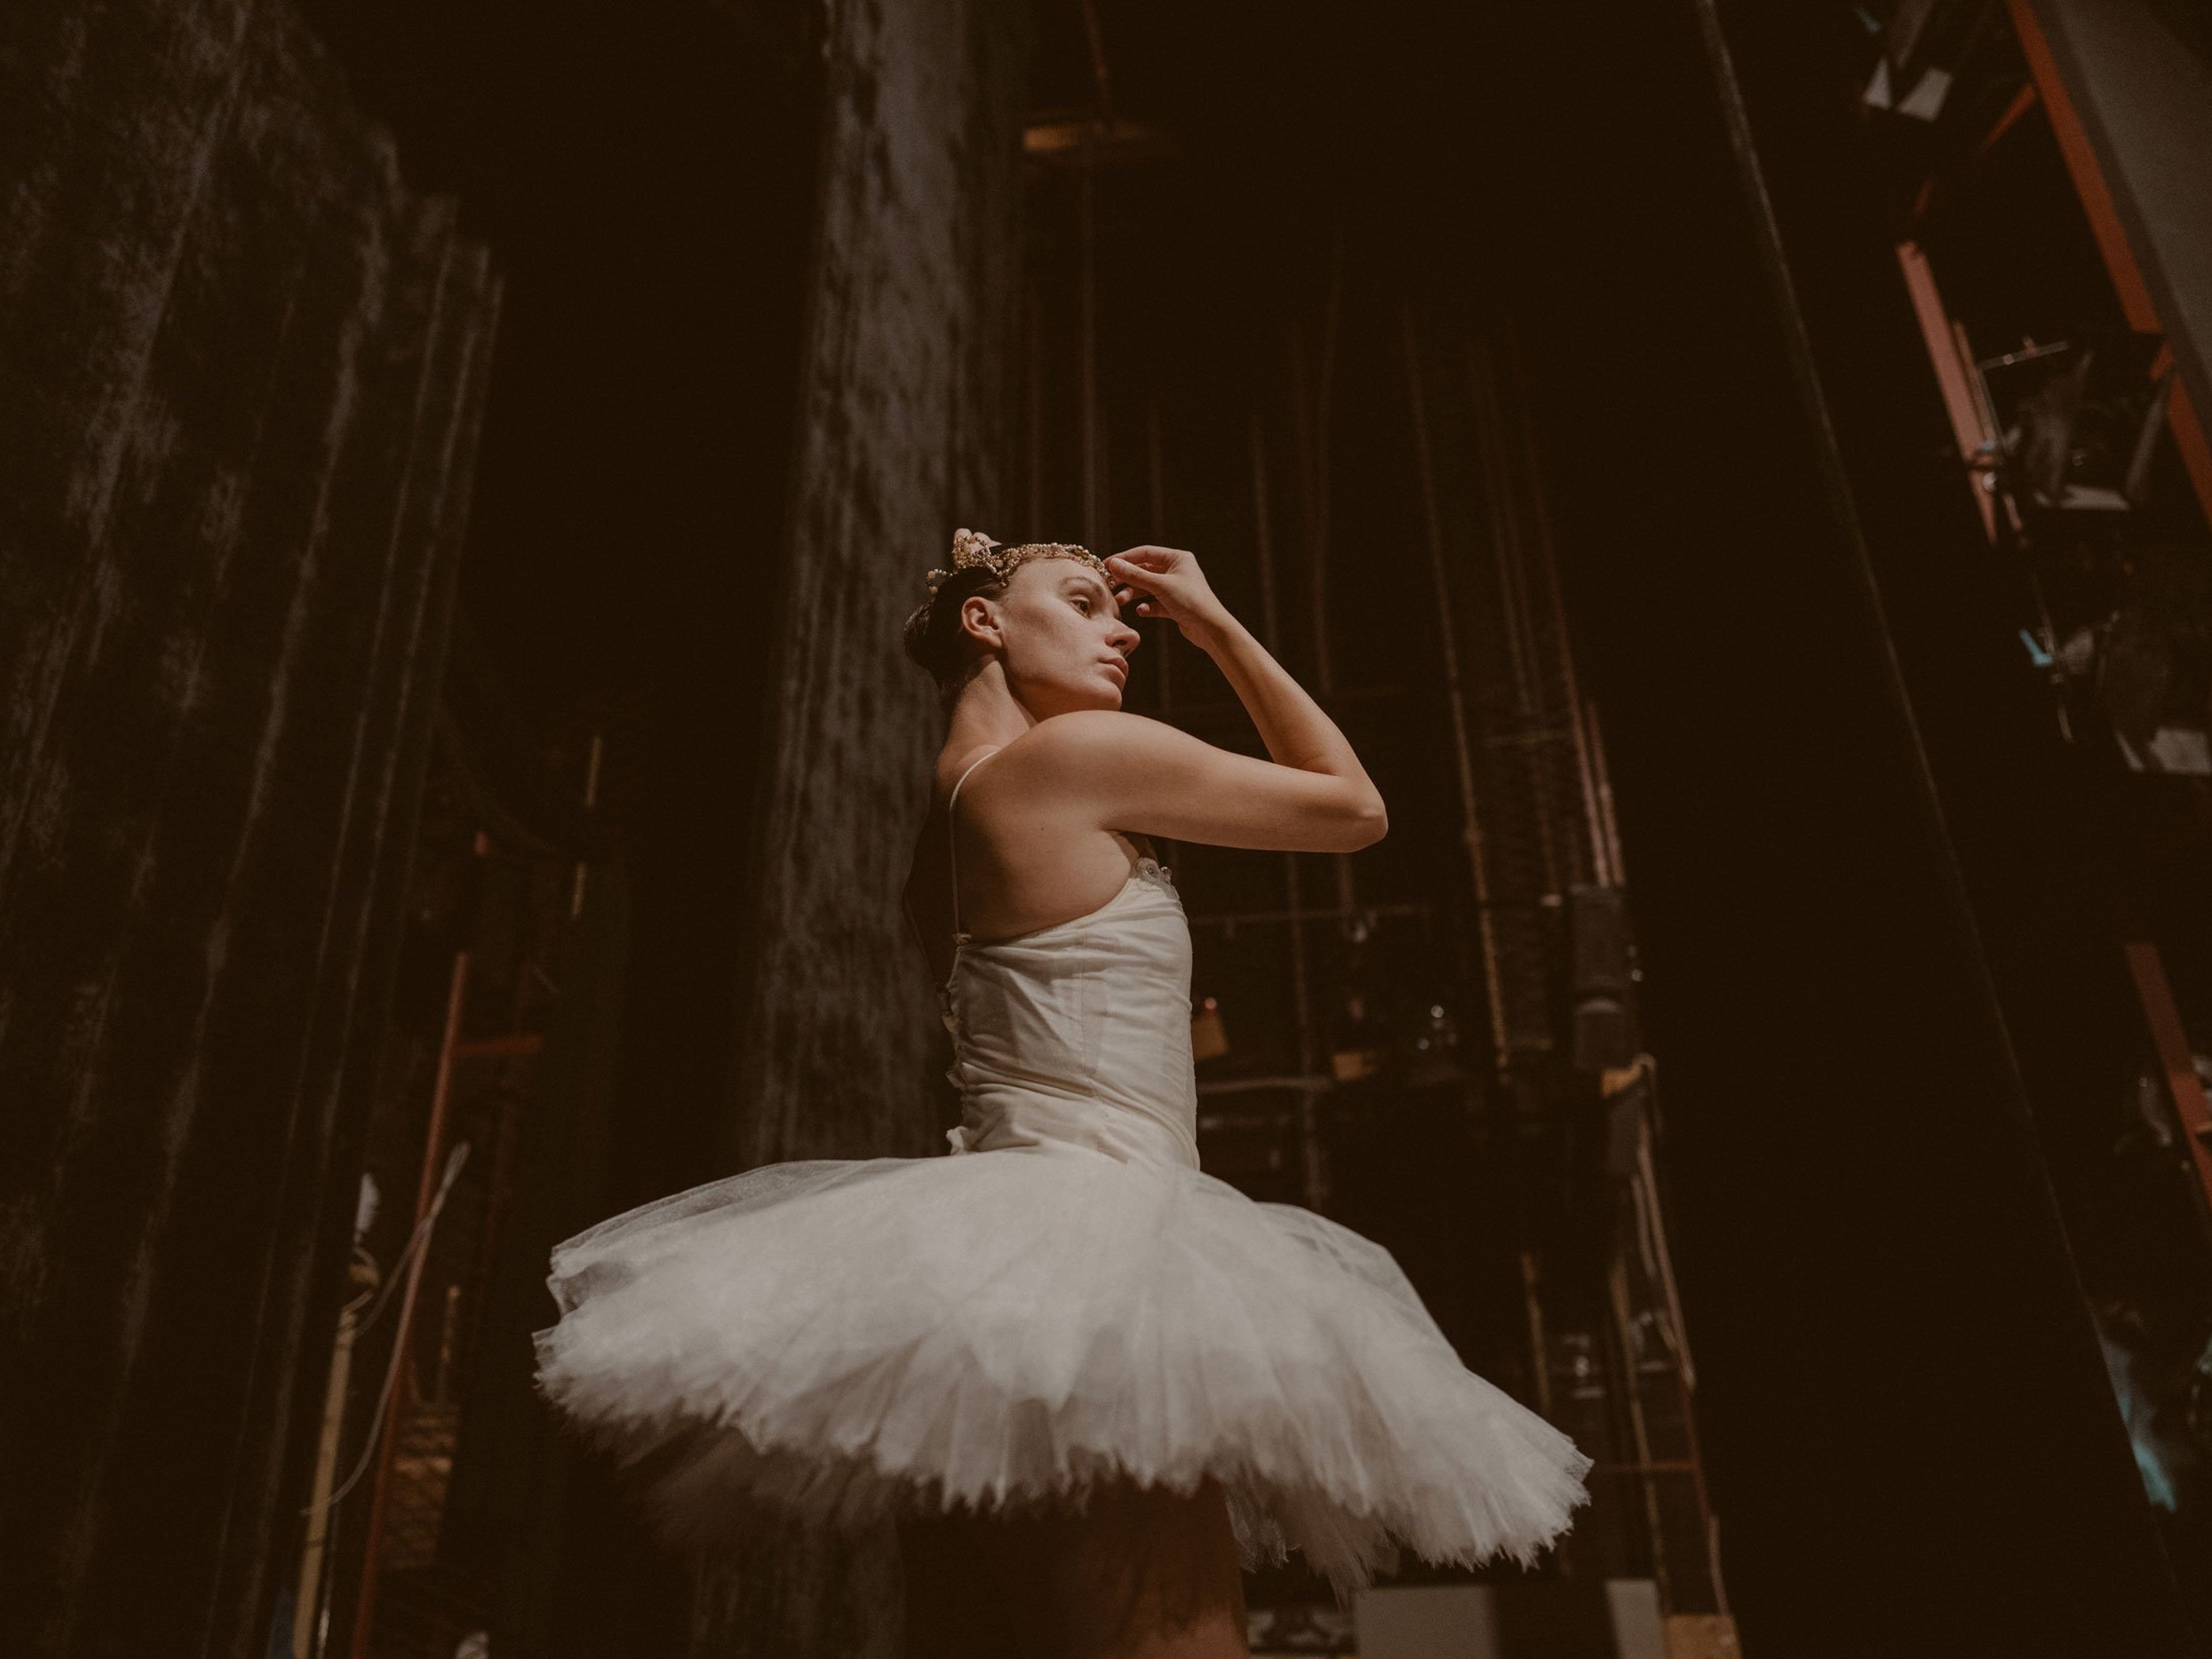 Photo of a ballet dancer backstage having the last preparations before her performance.